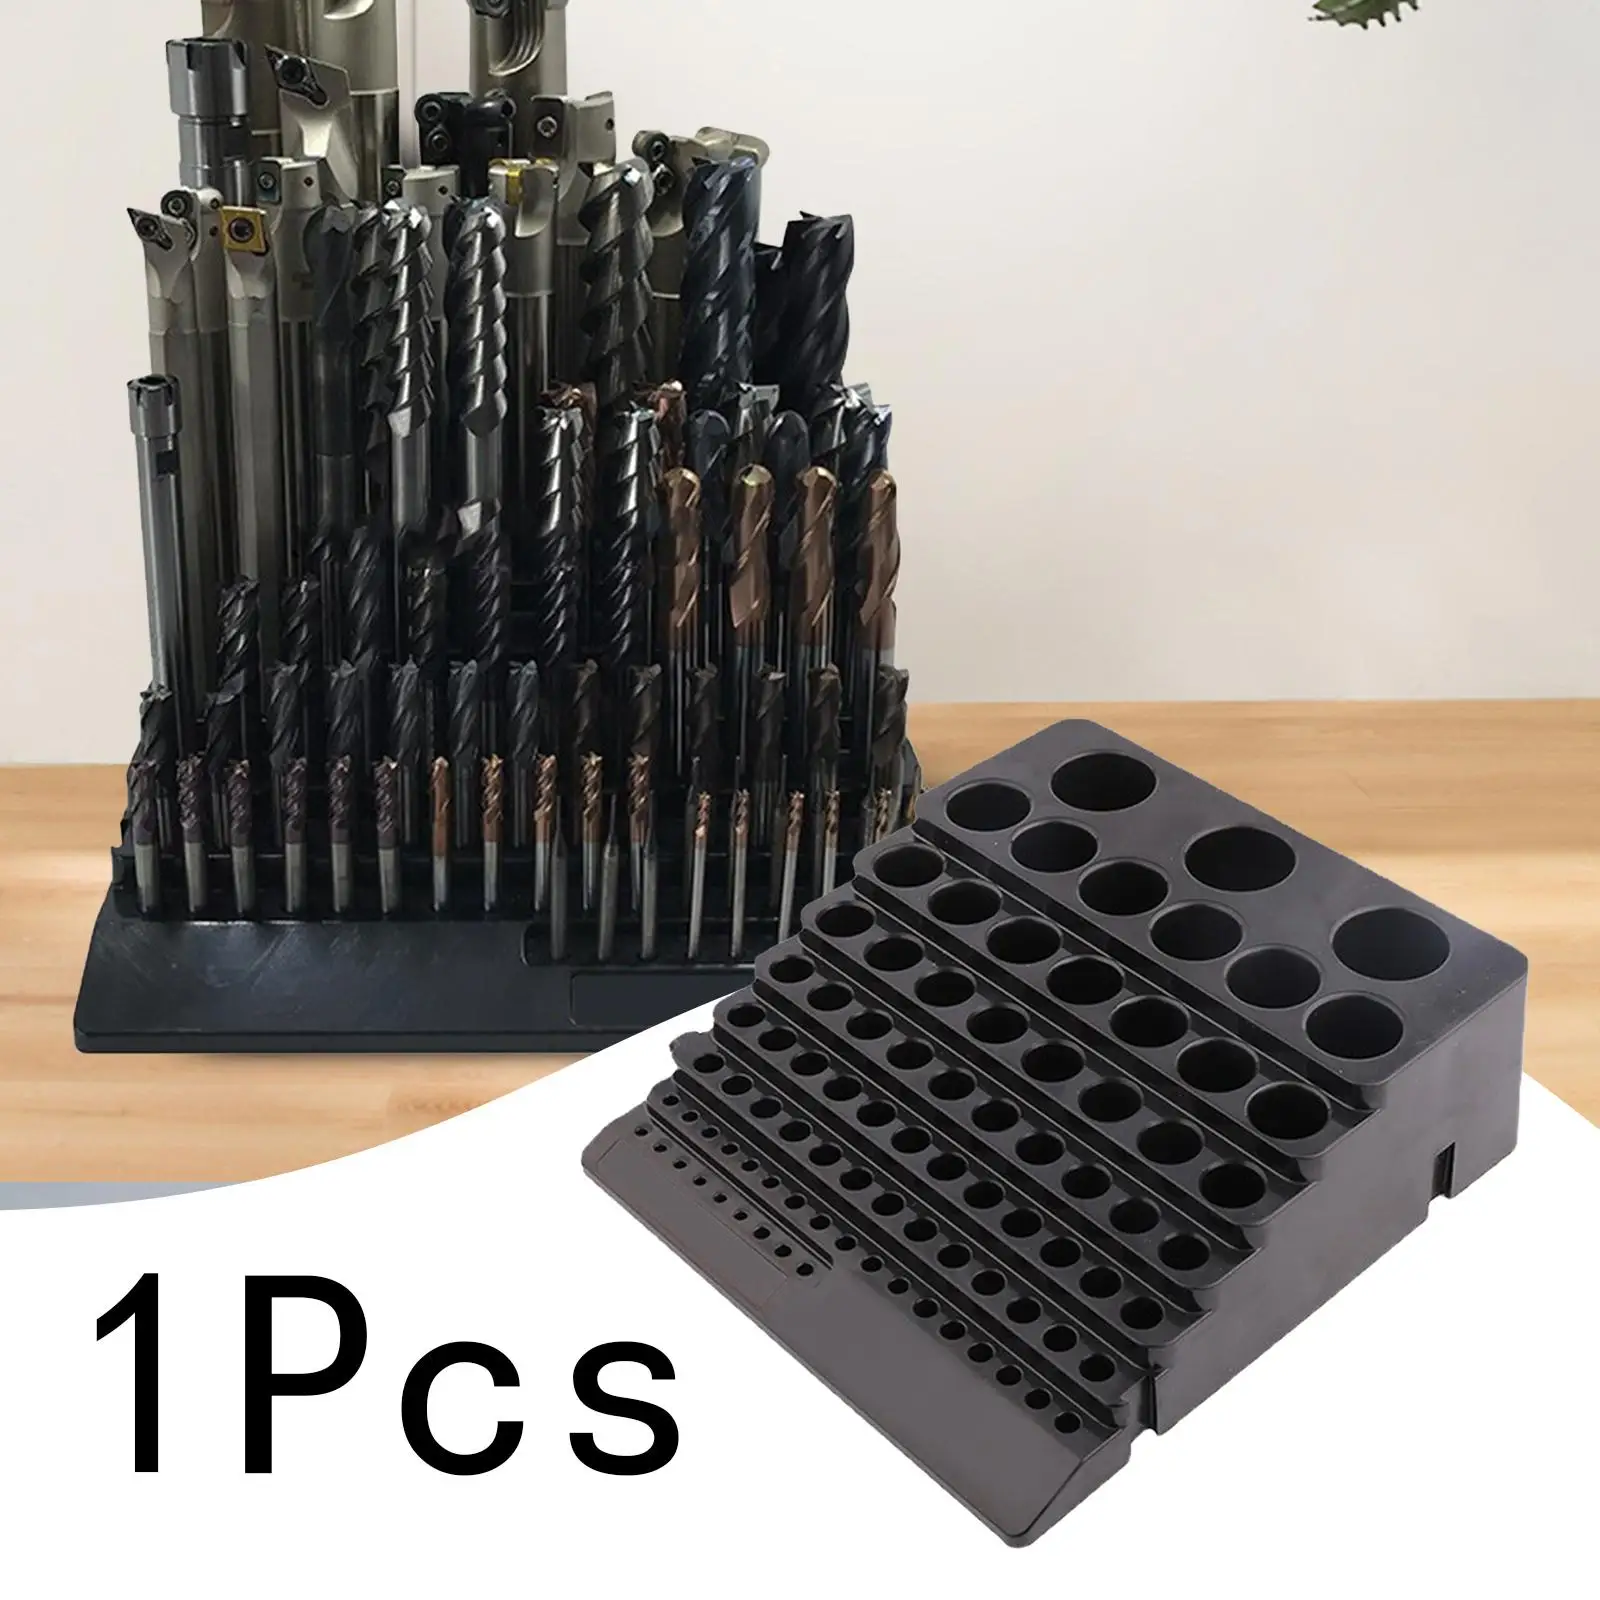 Hex Bit Organizer Rotary Tool Rack Holder CNC for 85 Bits Router Bit Tray